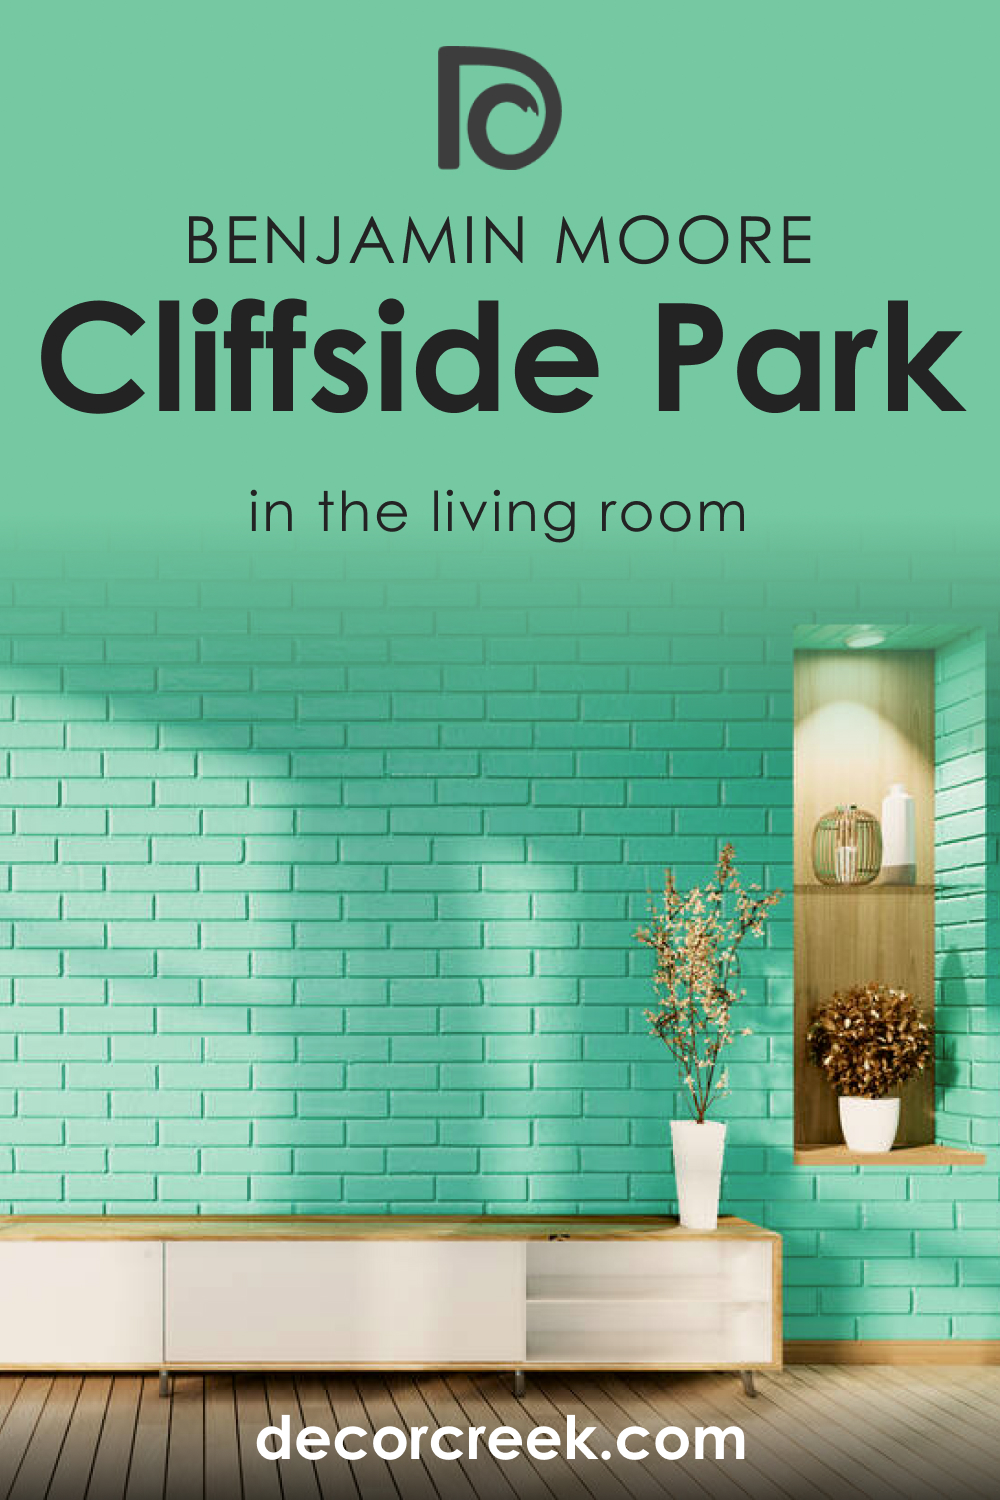 How to Use Cliffside Park 579 in the Living Room?